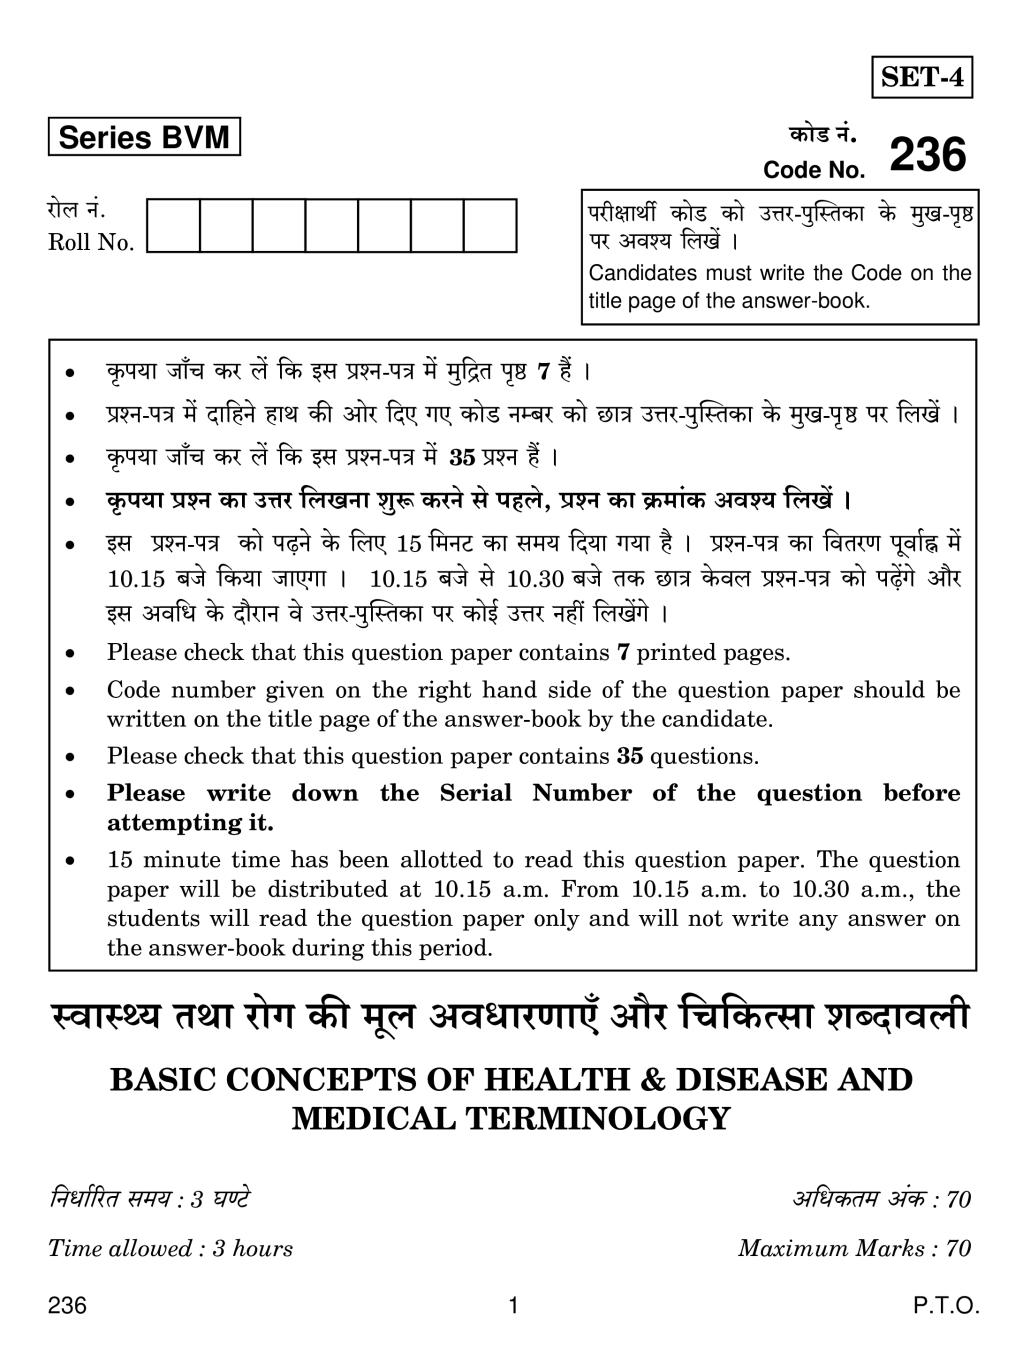 CBSE Class 12 Basic Concepts of Health and Disease and Medical Terminology Question Paper 2019 - Page 1